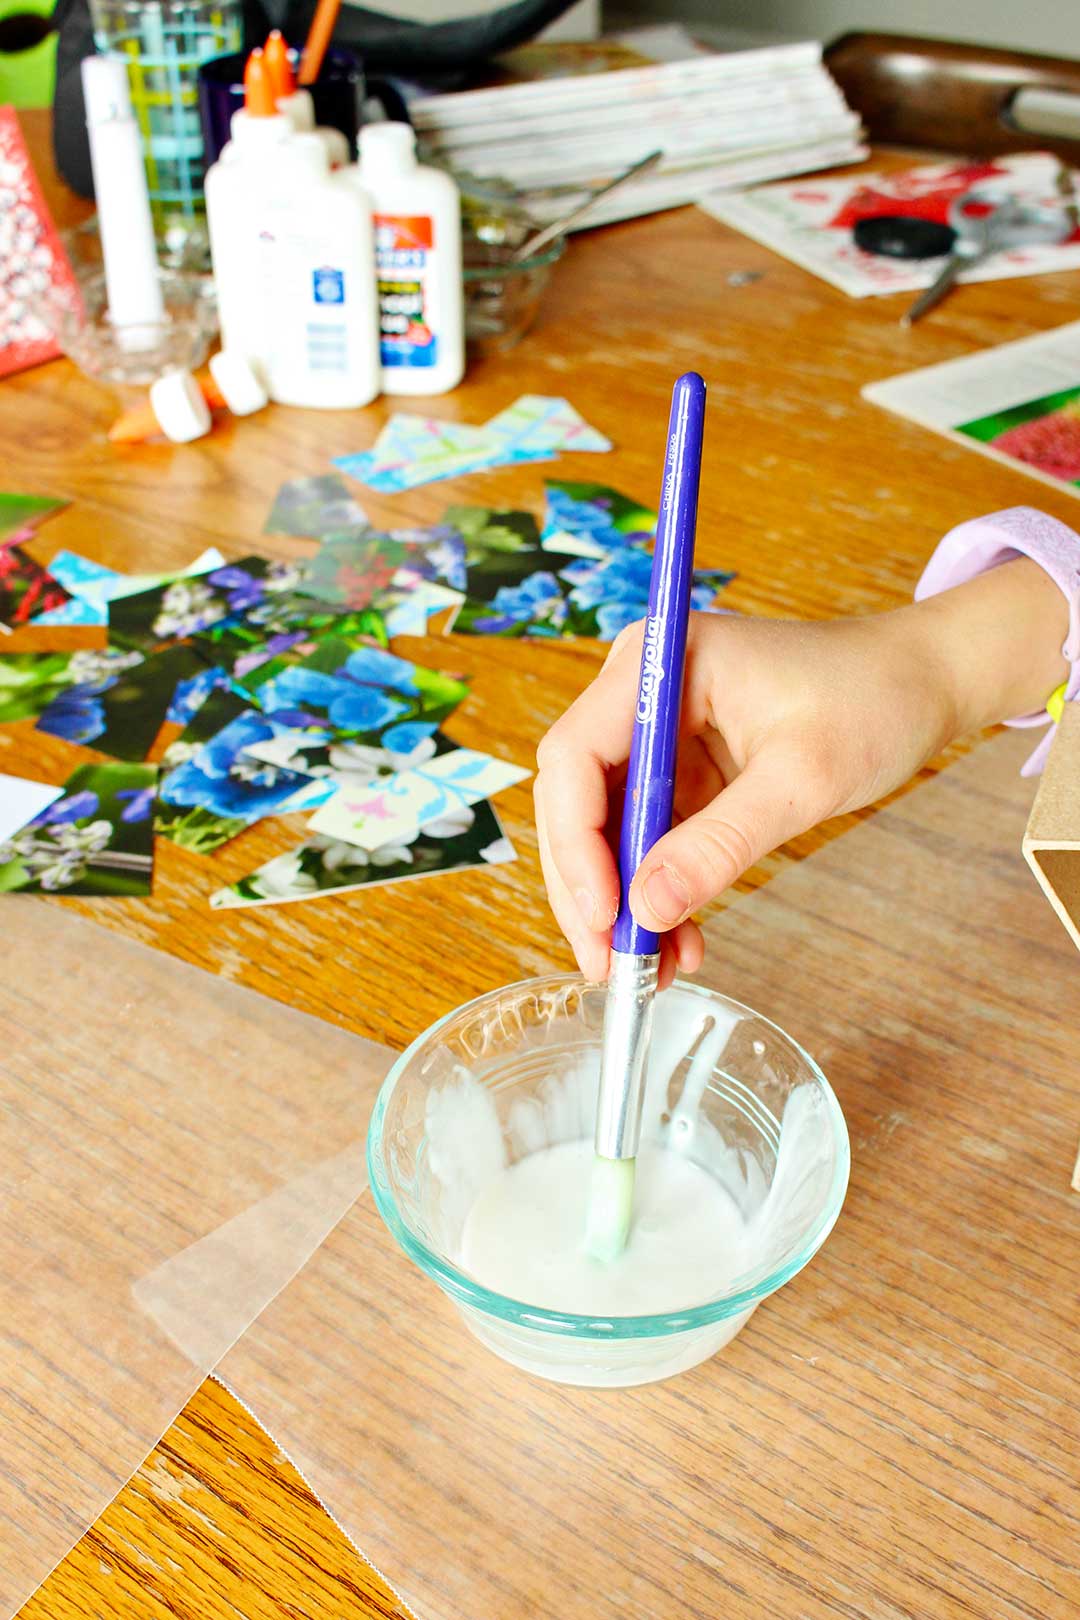 Decoupage How To - Make a Waterproof Drinking Glass